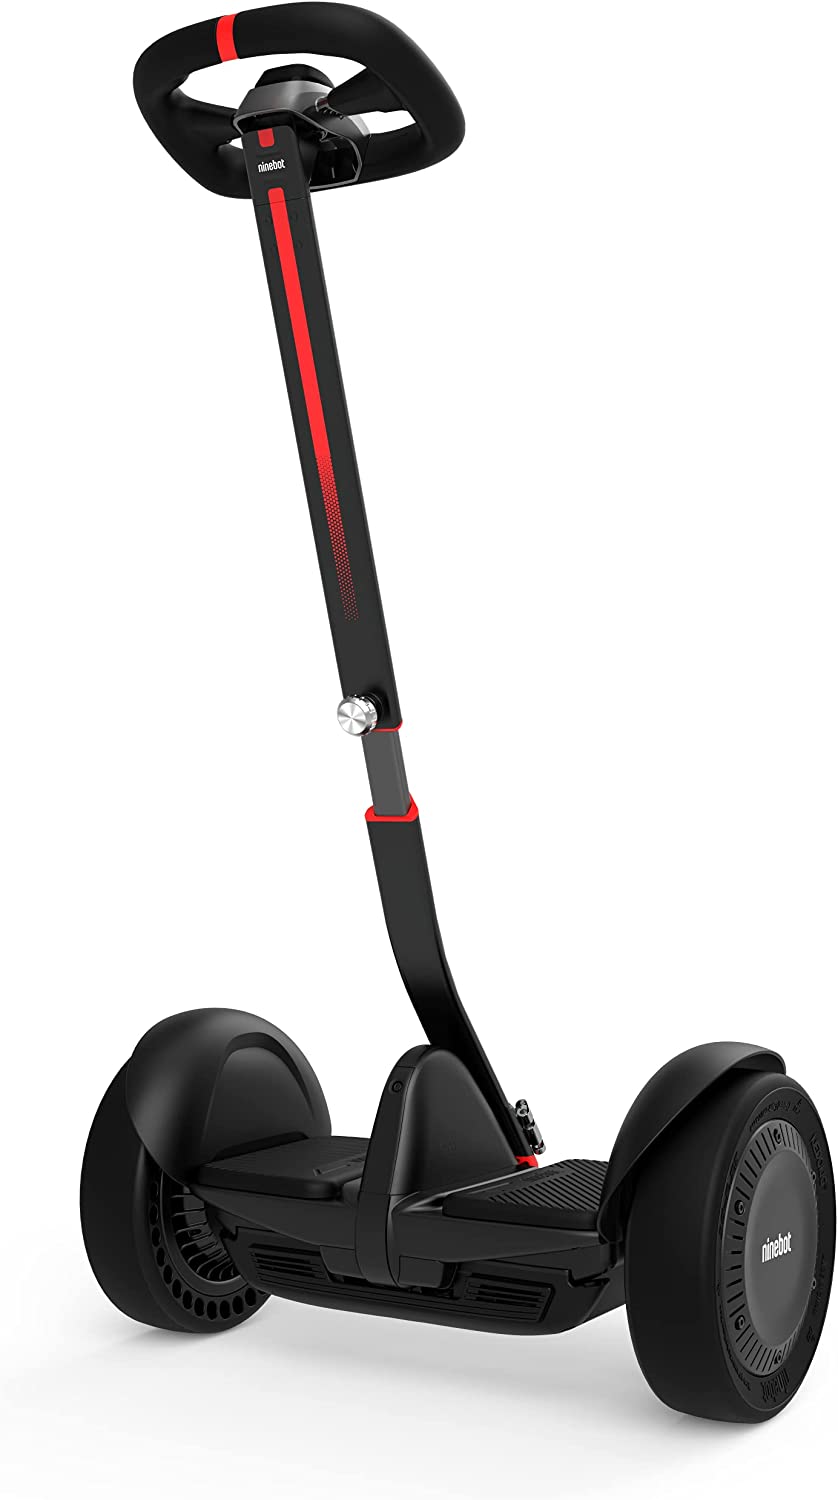 Ninebot S Max Smart Self-Balancing Electric Scooter with LED Li -